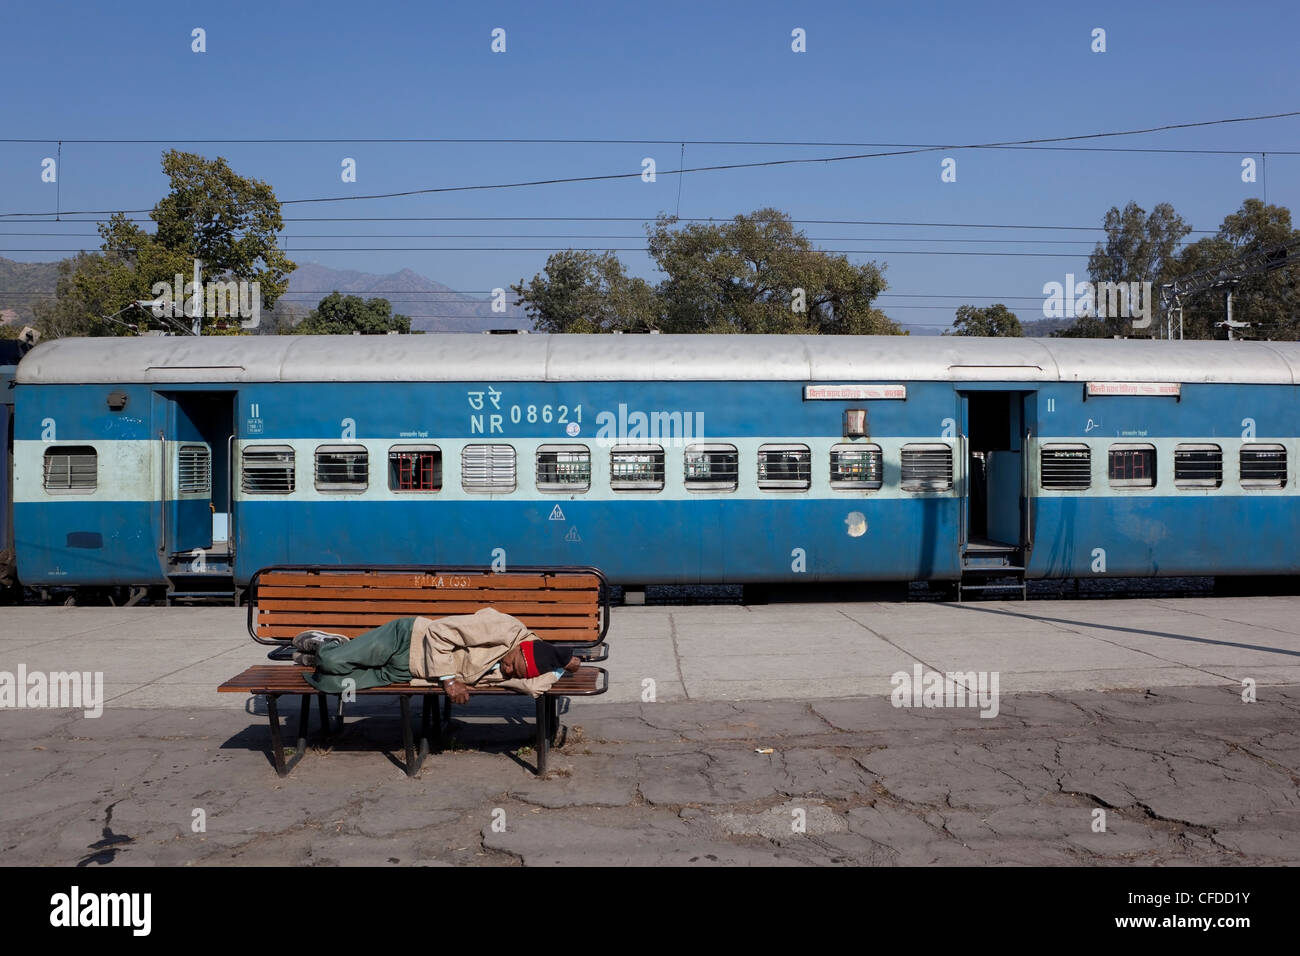 a man sleeps on a bench at Kalka railway station in the Indian state of Haryana, with blue railway carriages Stock Photo